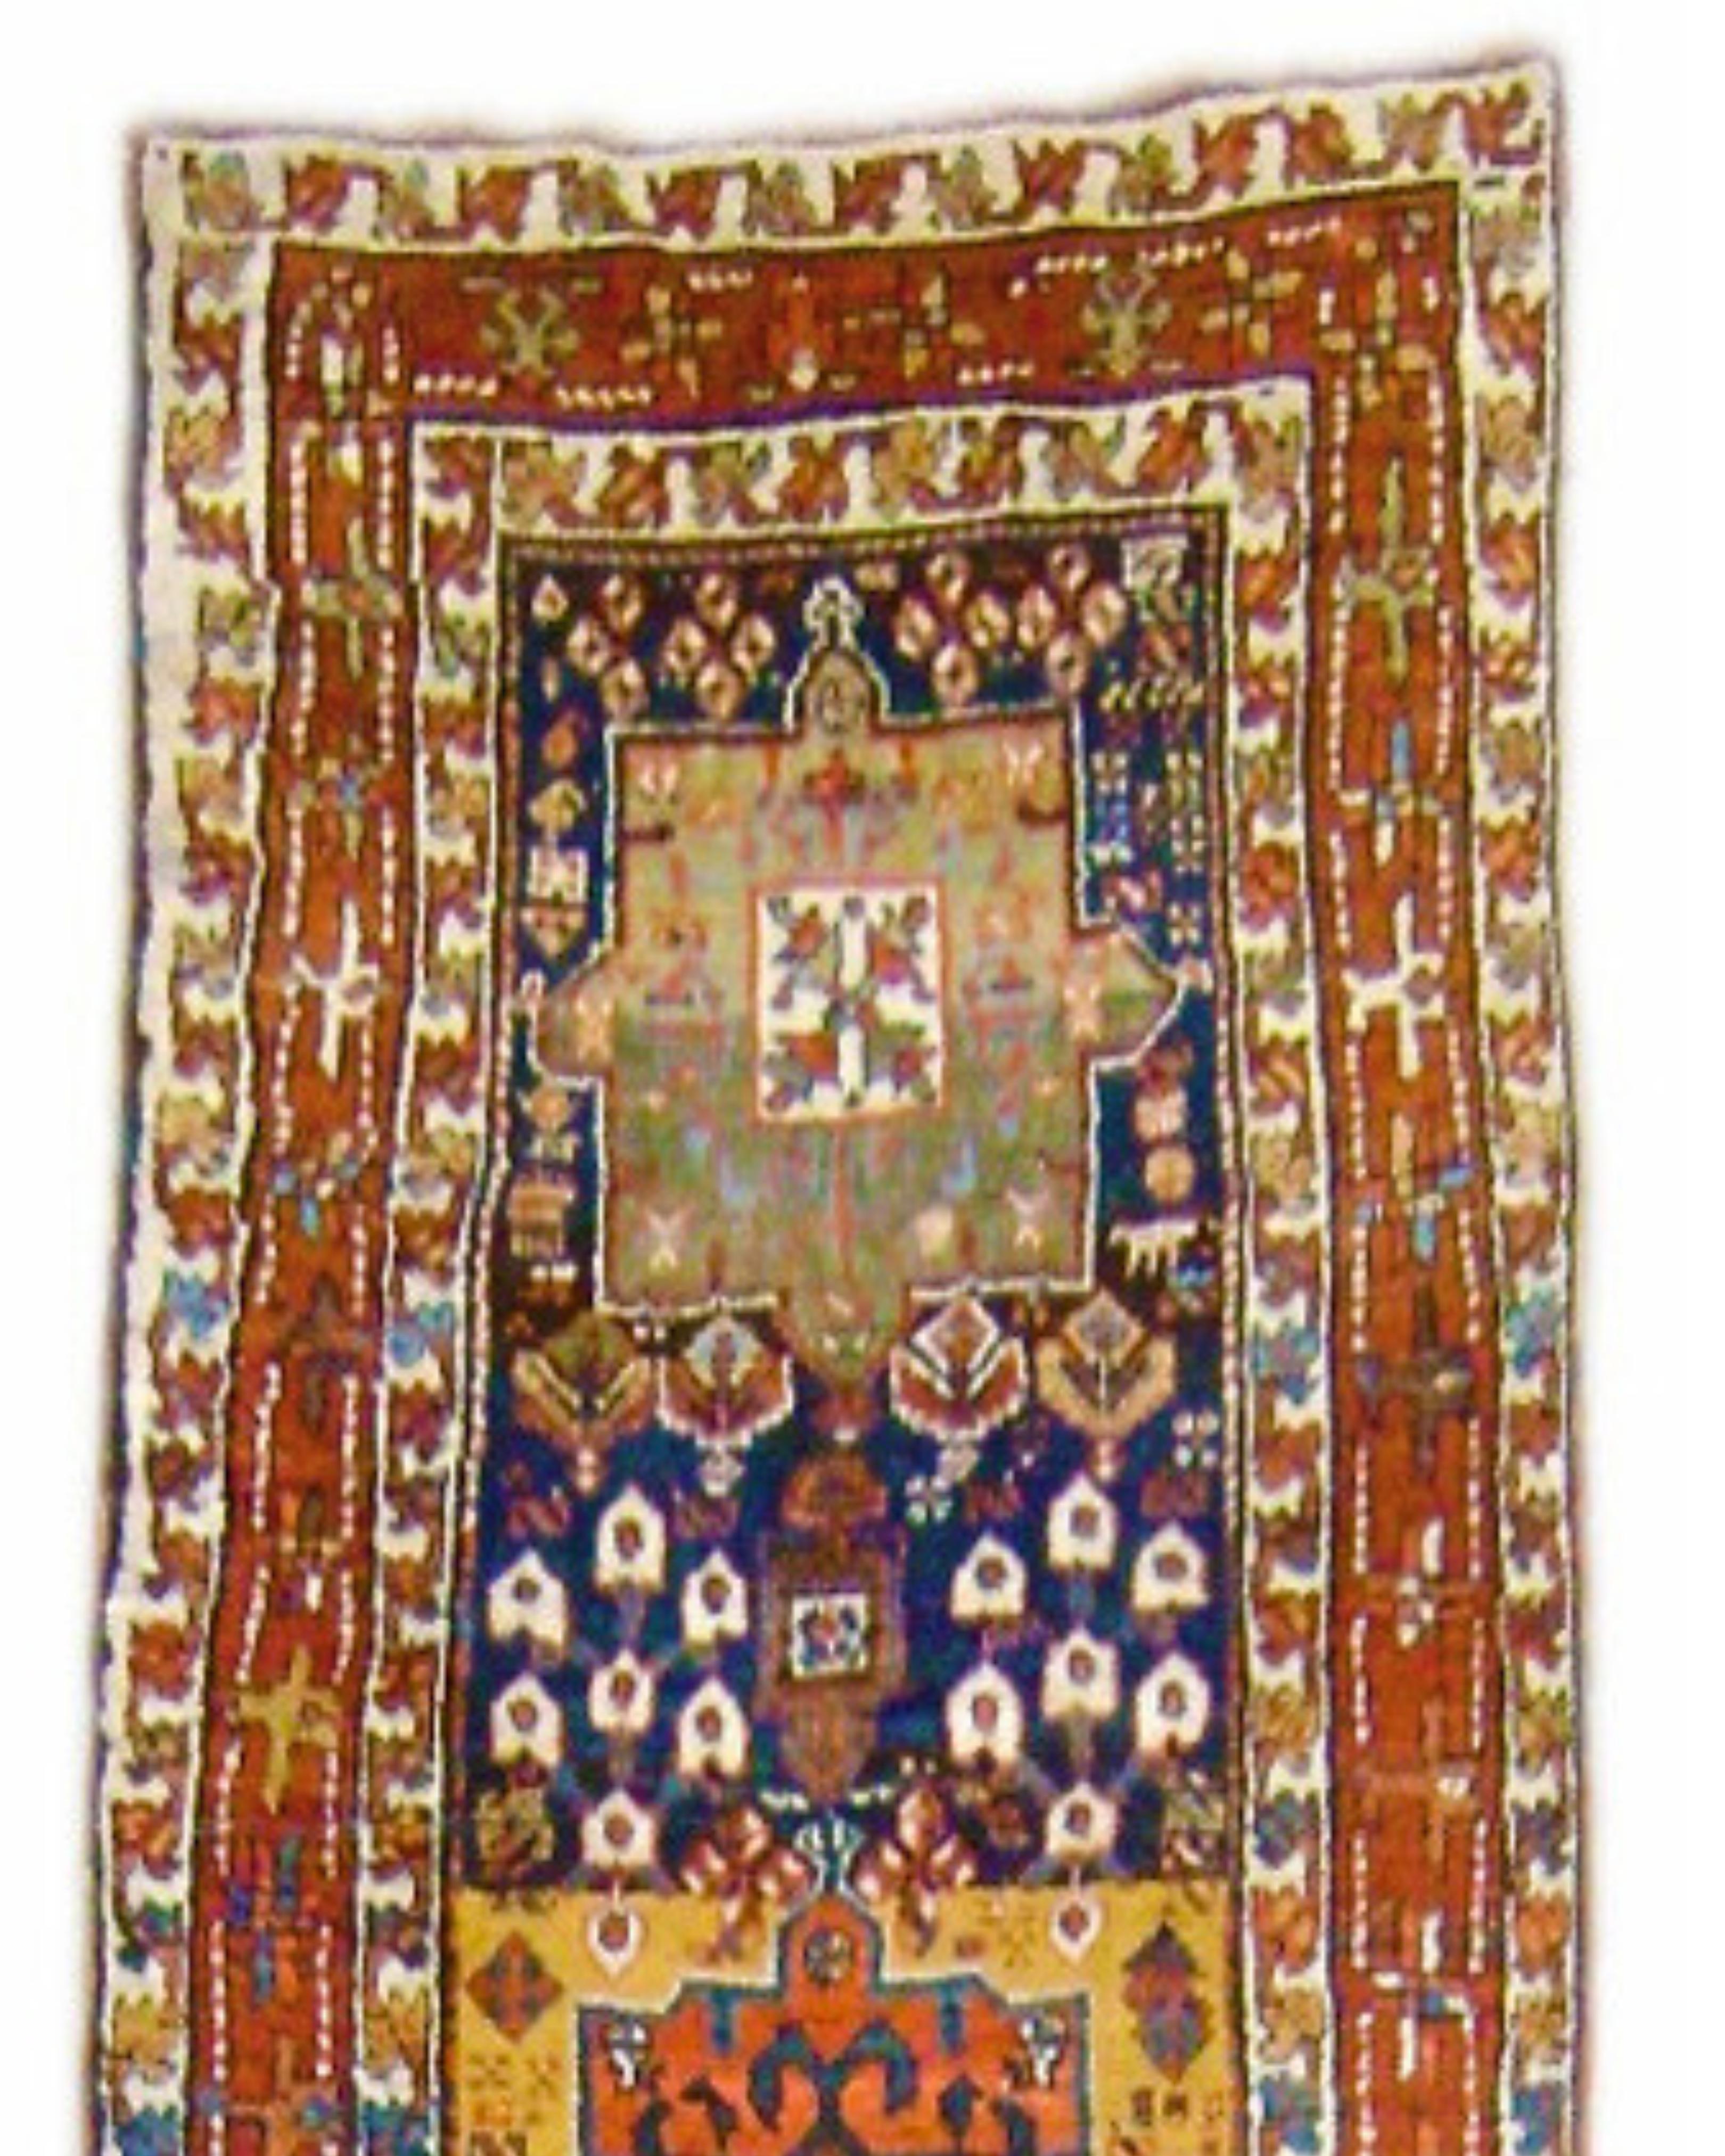 Antique Persian Karadagh Runner Rug, 19th Century

Additional Information:
Dimensions: 3'4